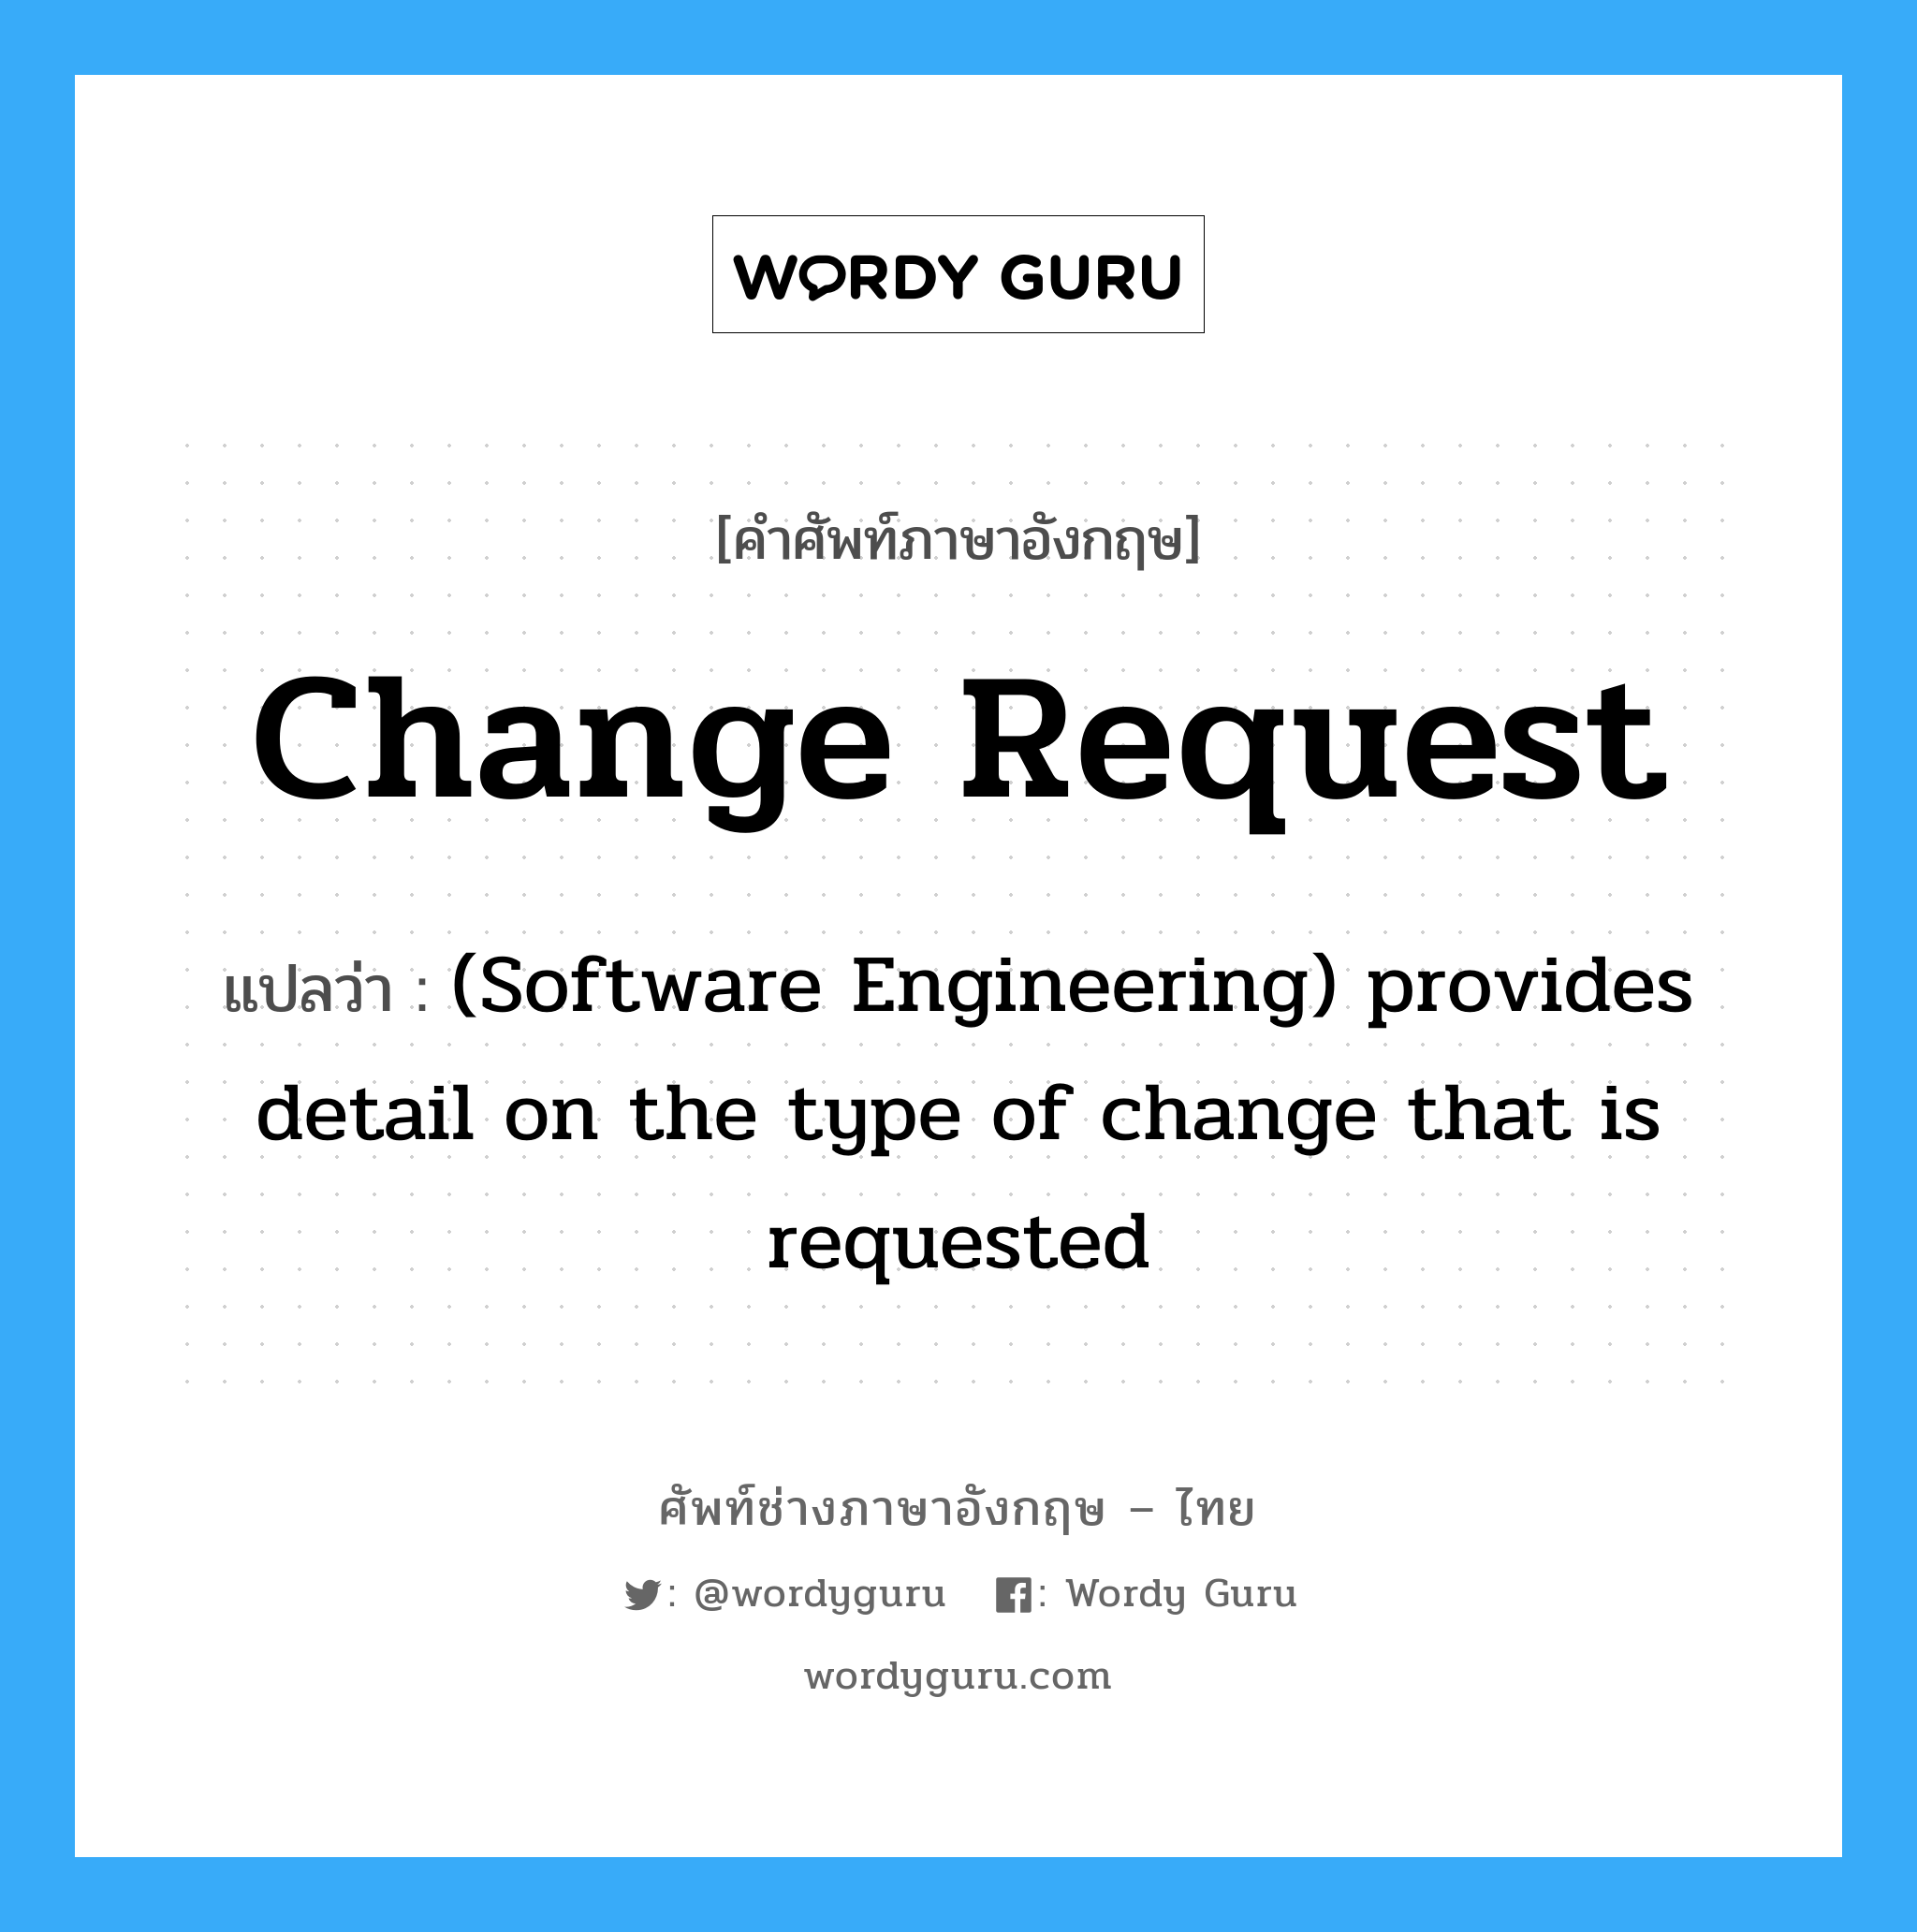 Change request แปลว่า?, คำศัพท์ช่างภาษาอังกฤษ - ไทย Change request คำศัพท์ภาษาอังกฤษ Change request แปลว่า (Software Engineering) provides detail on the type of change that is requested